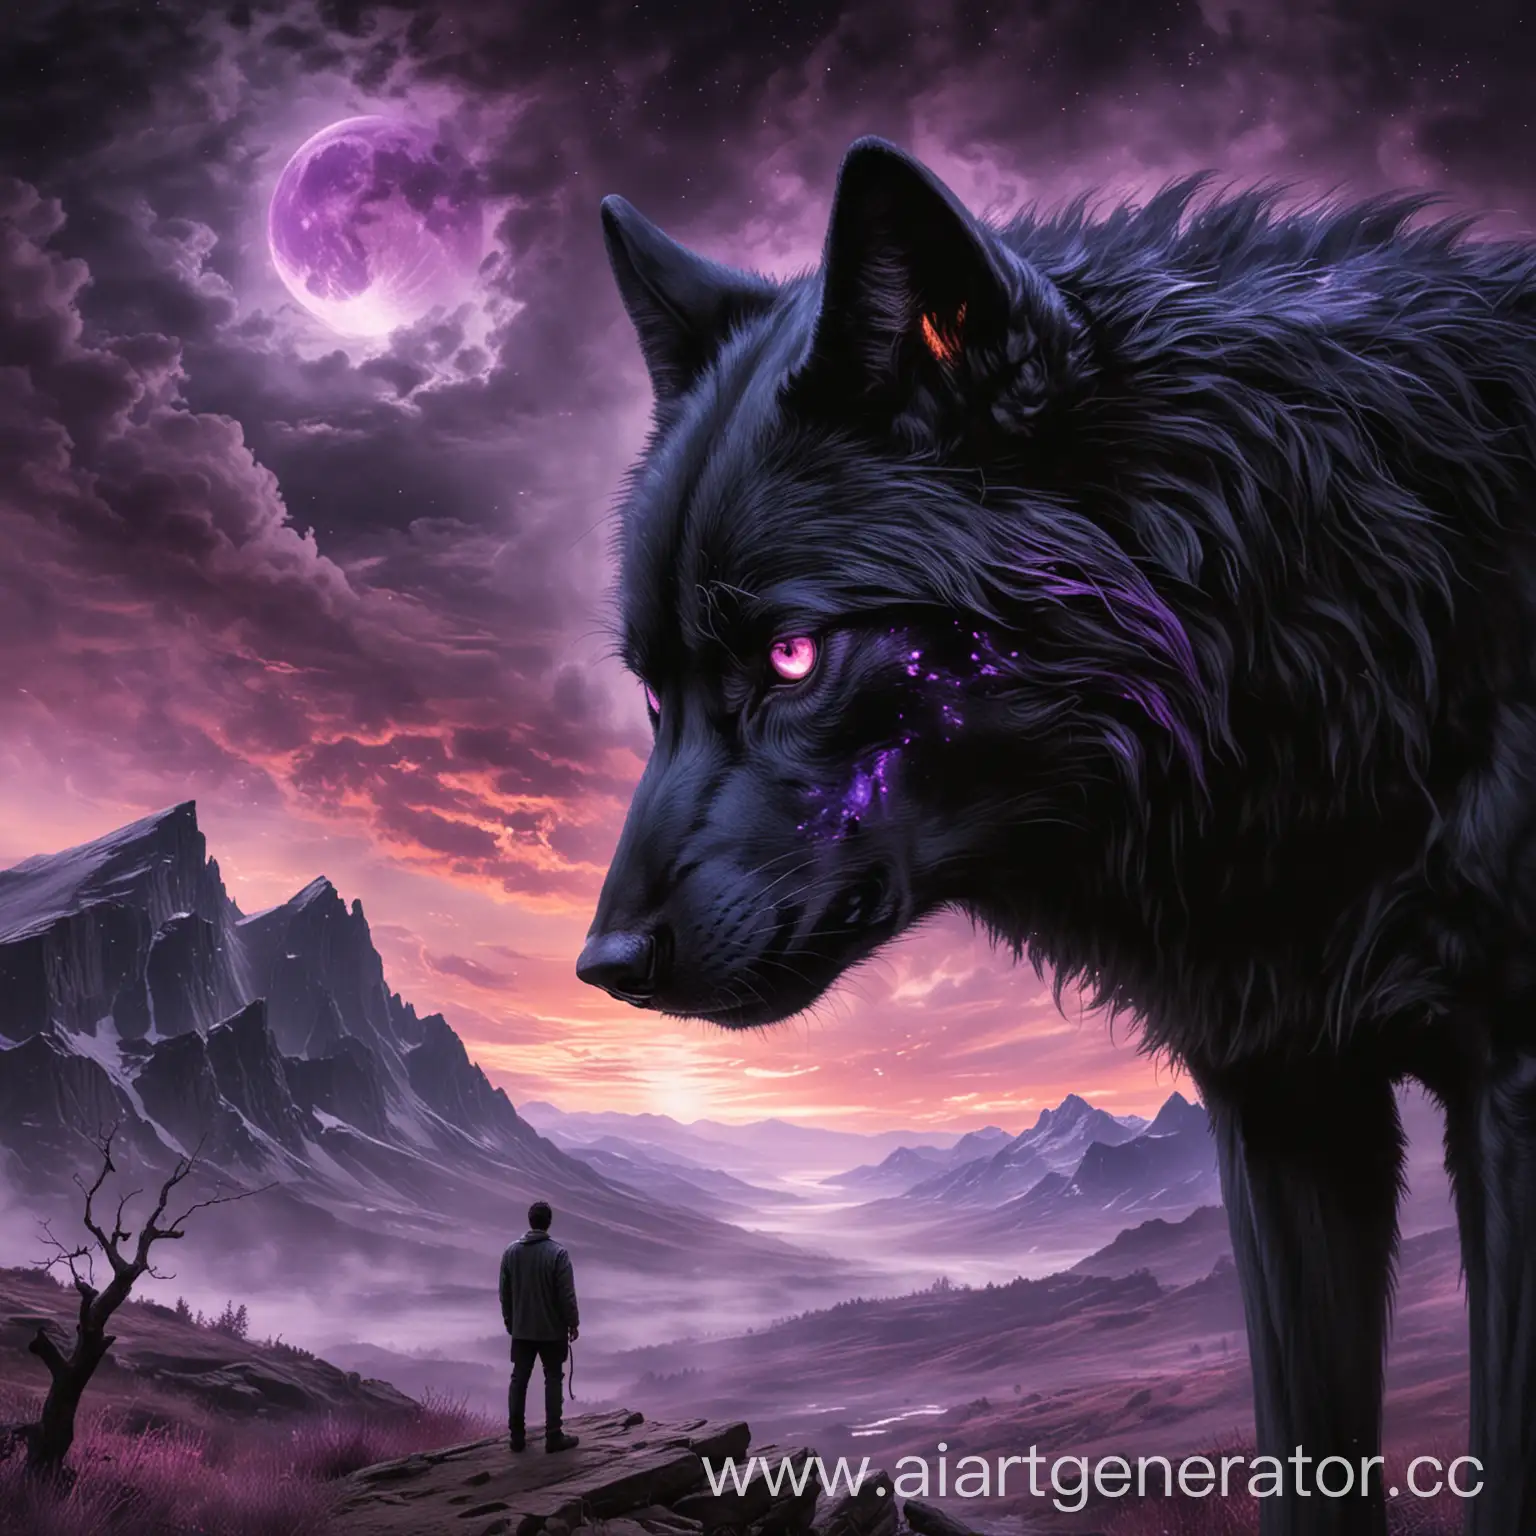 Man-Contemplating-with-FieryEyed-Black-Wolf